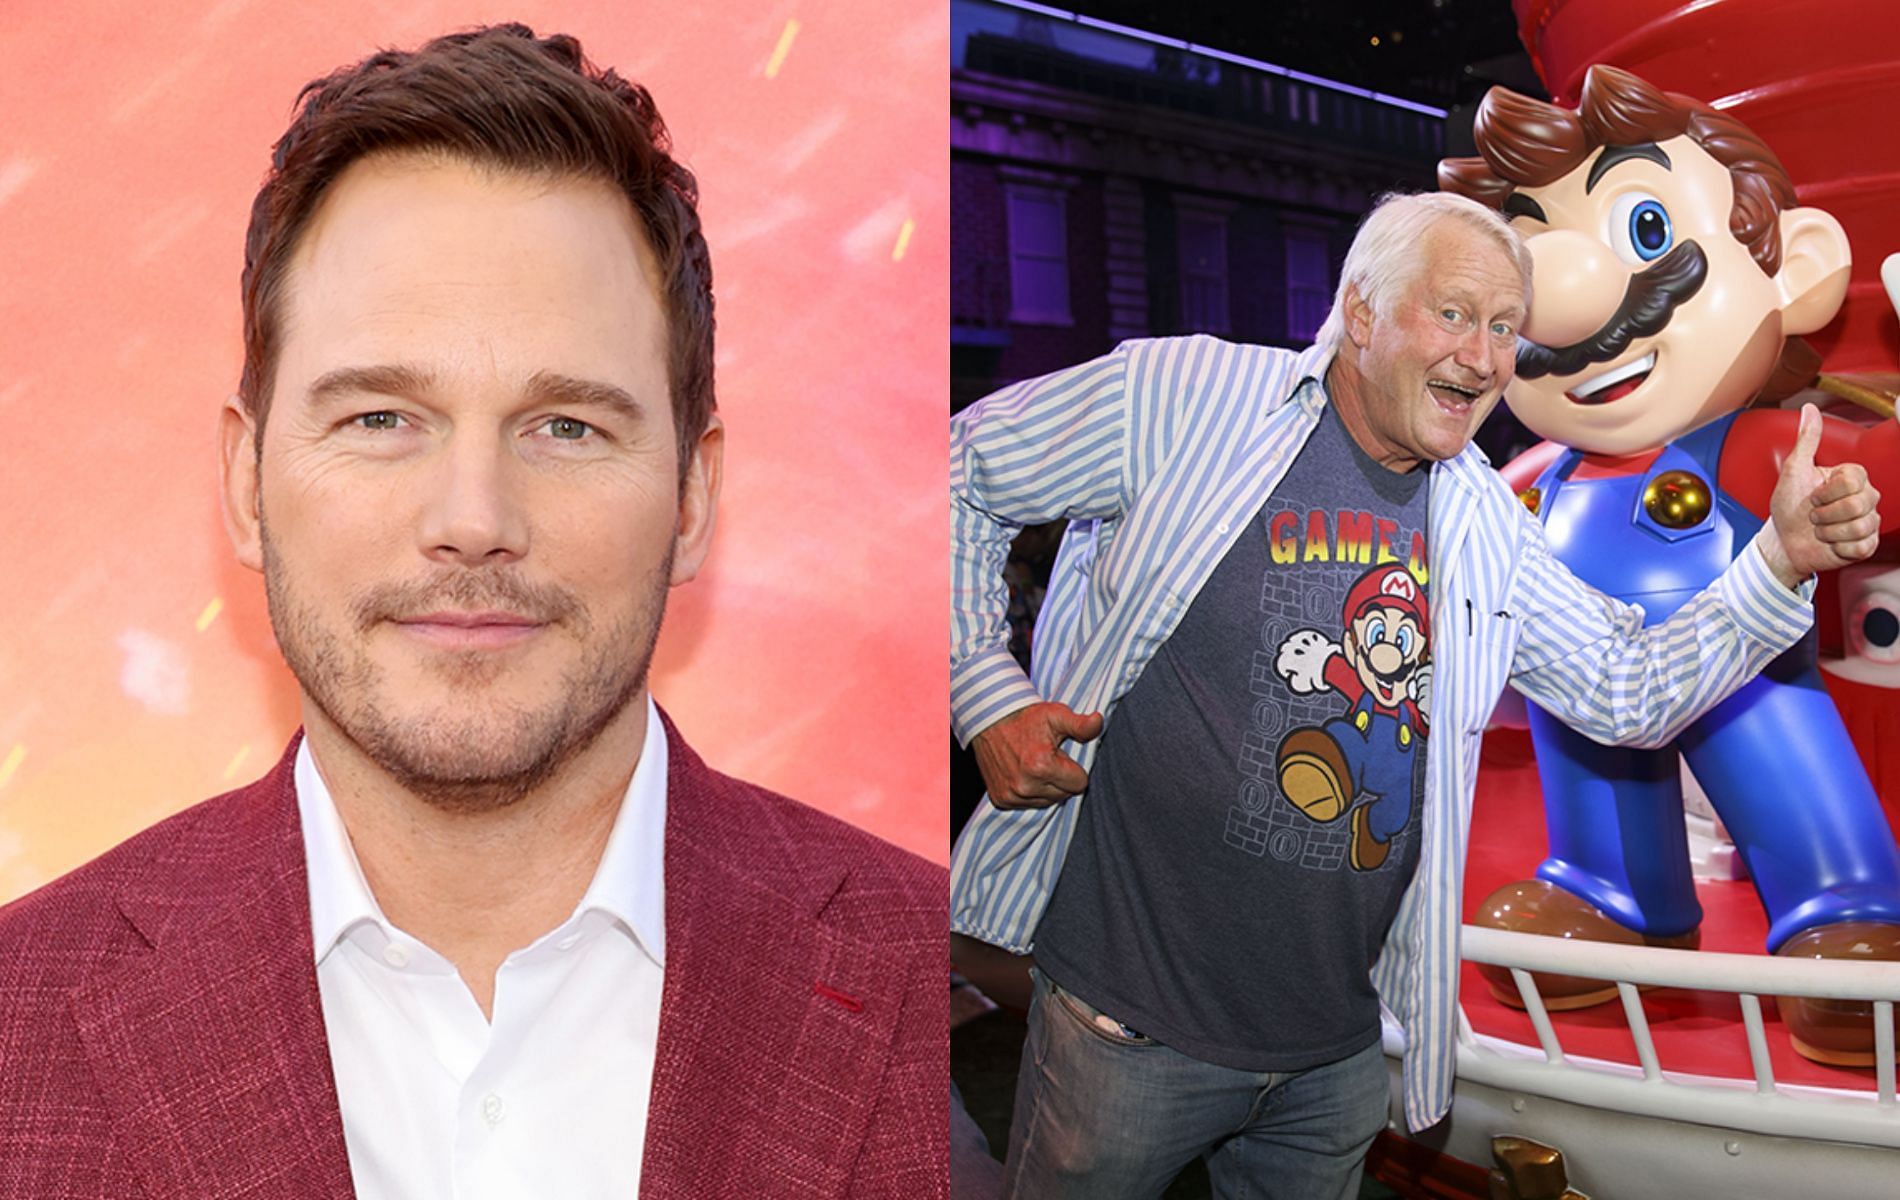 Cover art featuring actor Chris Pratt and voice actor Charles Martinet